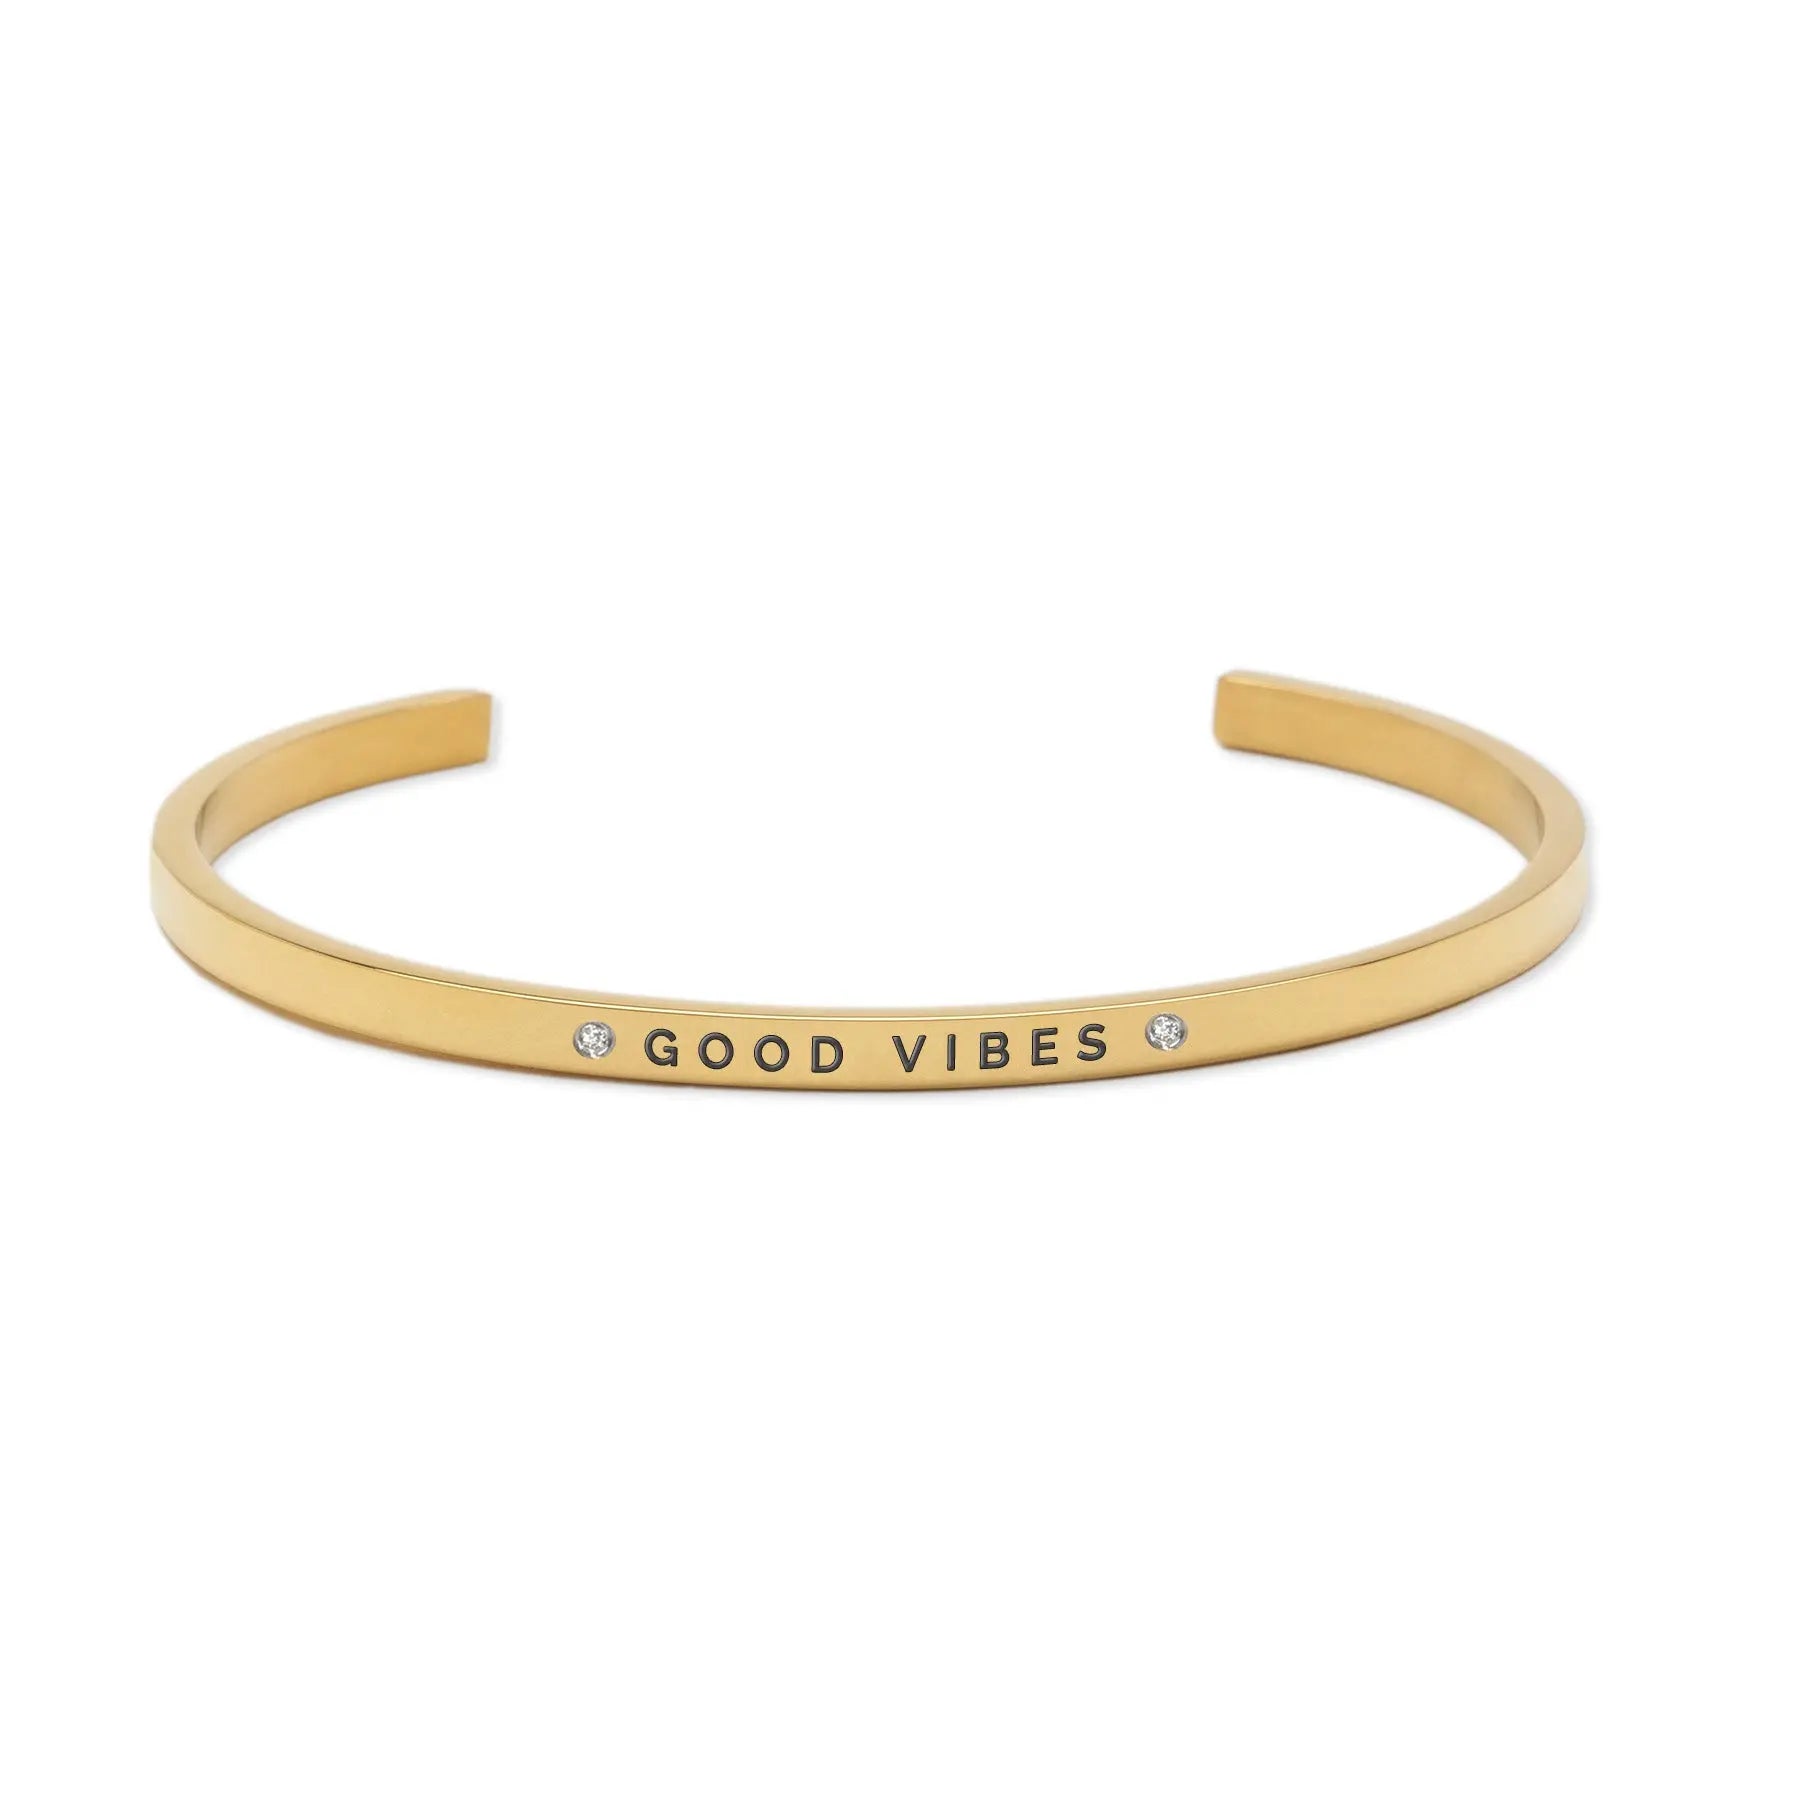 Adjustable gold bracelet with engraved Good Vibes message and diamond accents. Durable stainless steel, 3mm width. Available in silver and rose gold.